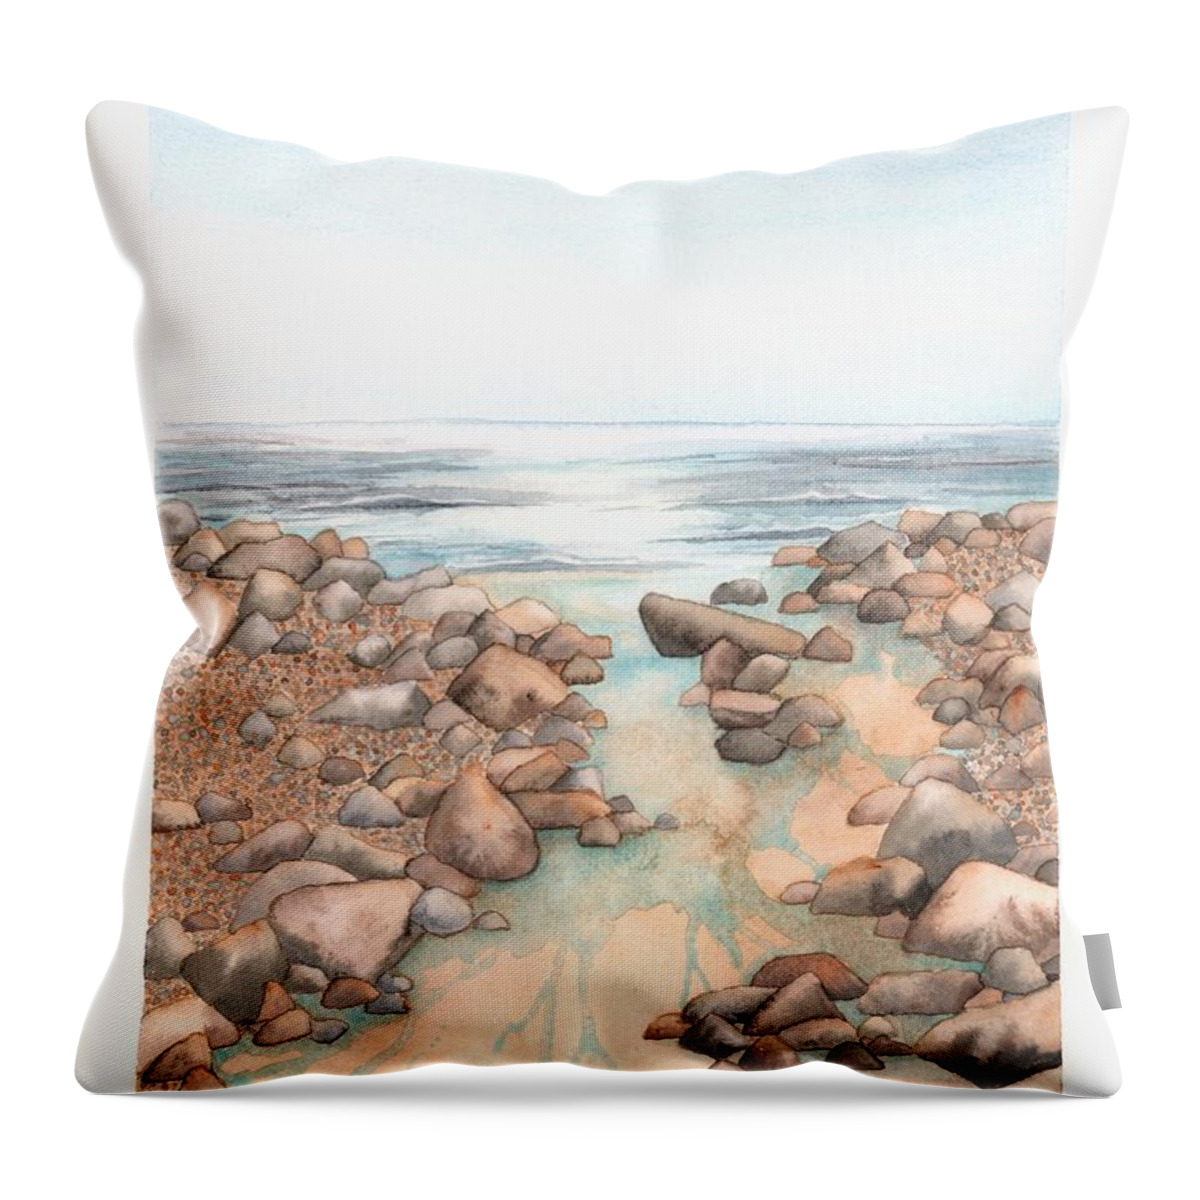 Landscape Throw Pillow featuring the painting Streaming Tide by Hilda Wagner